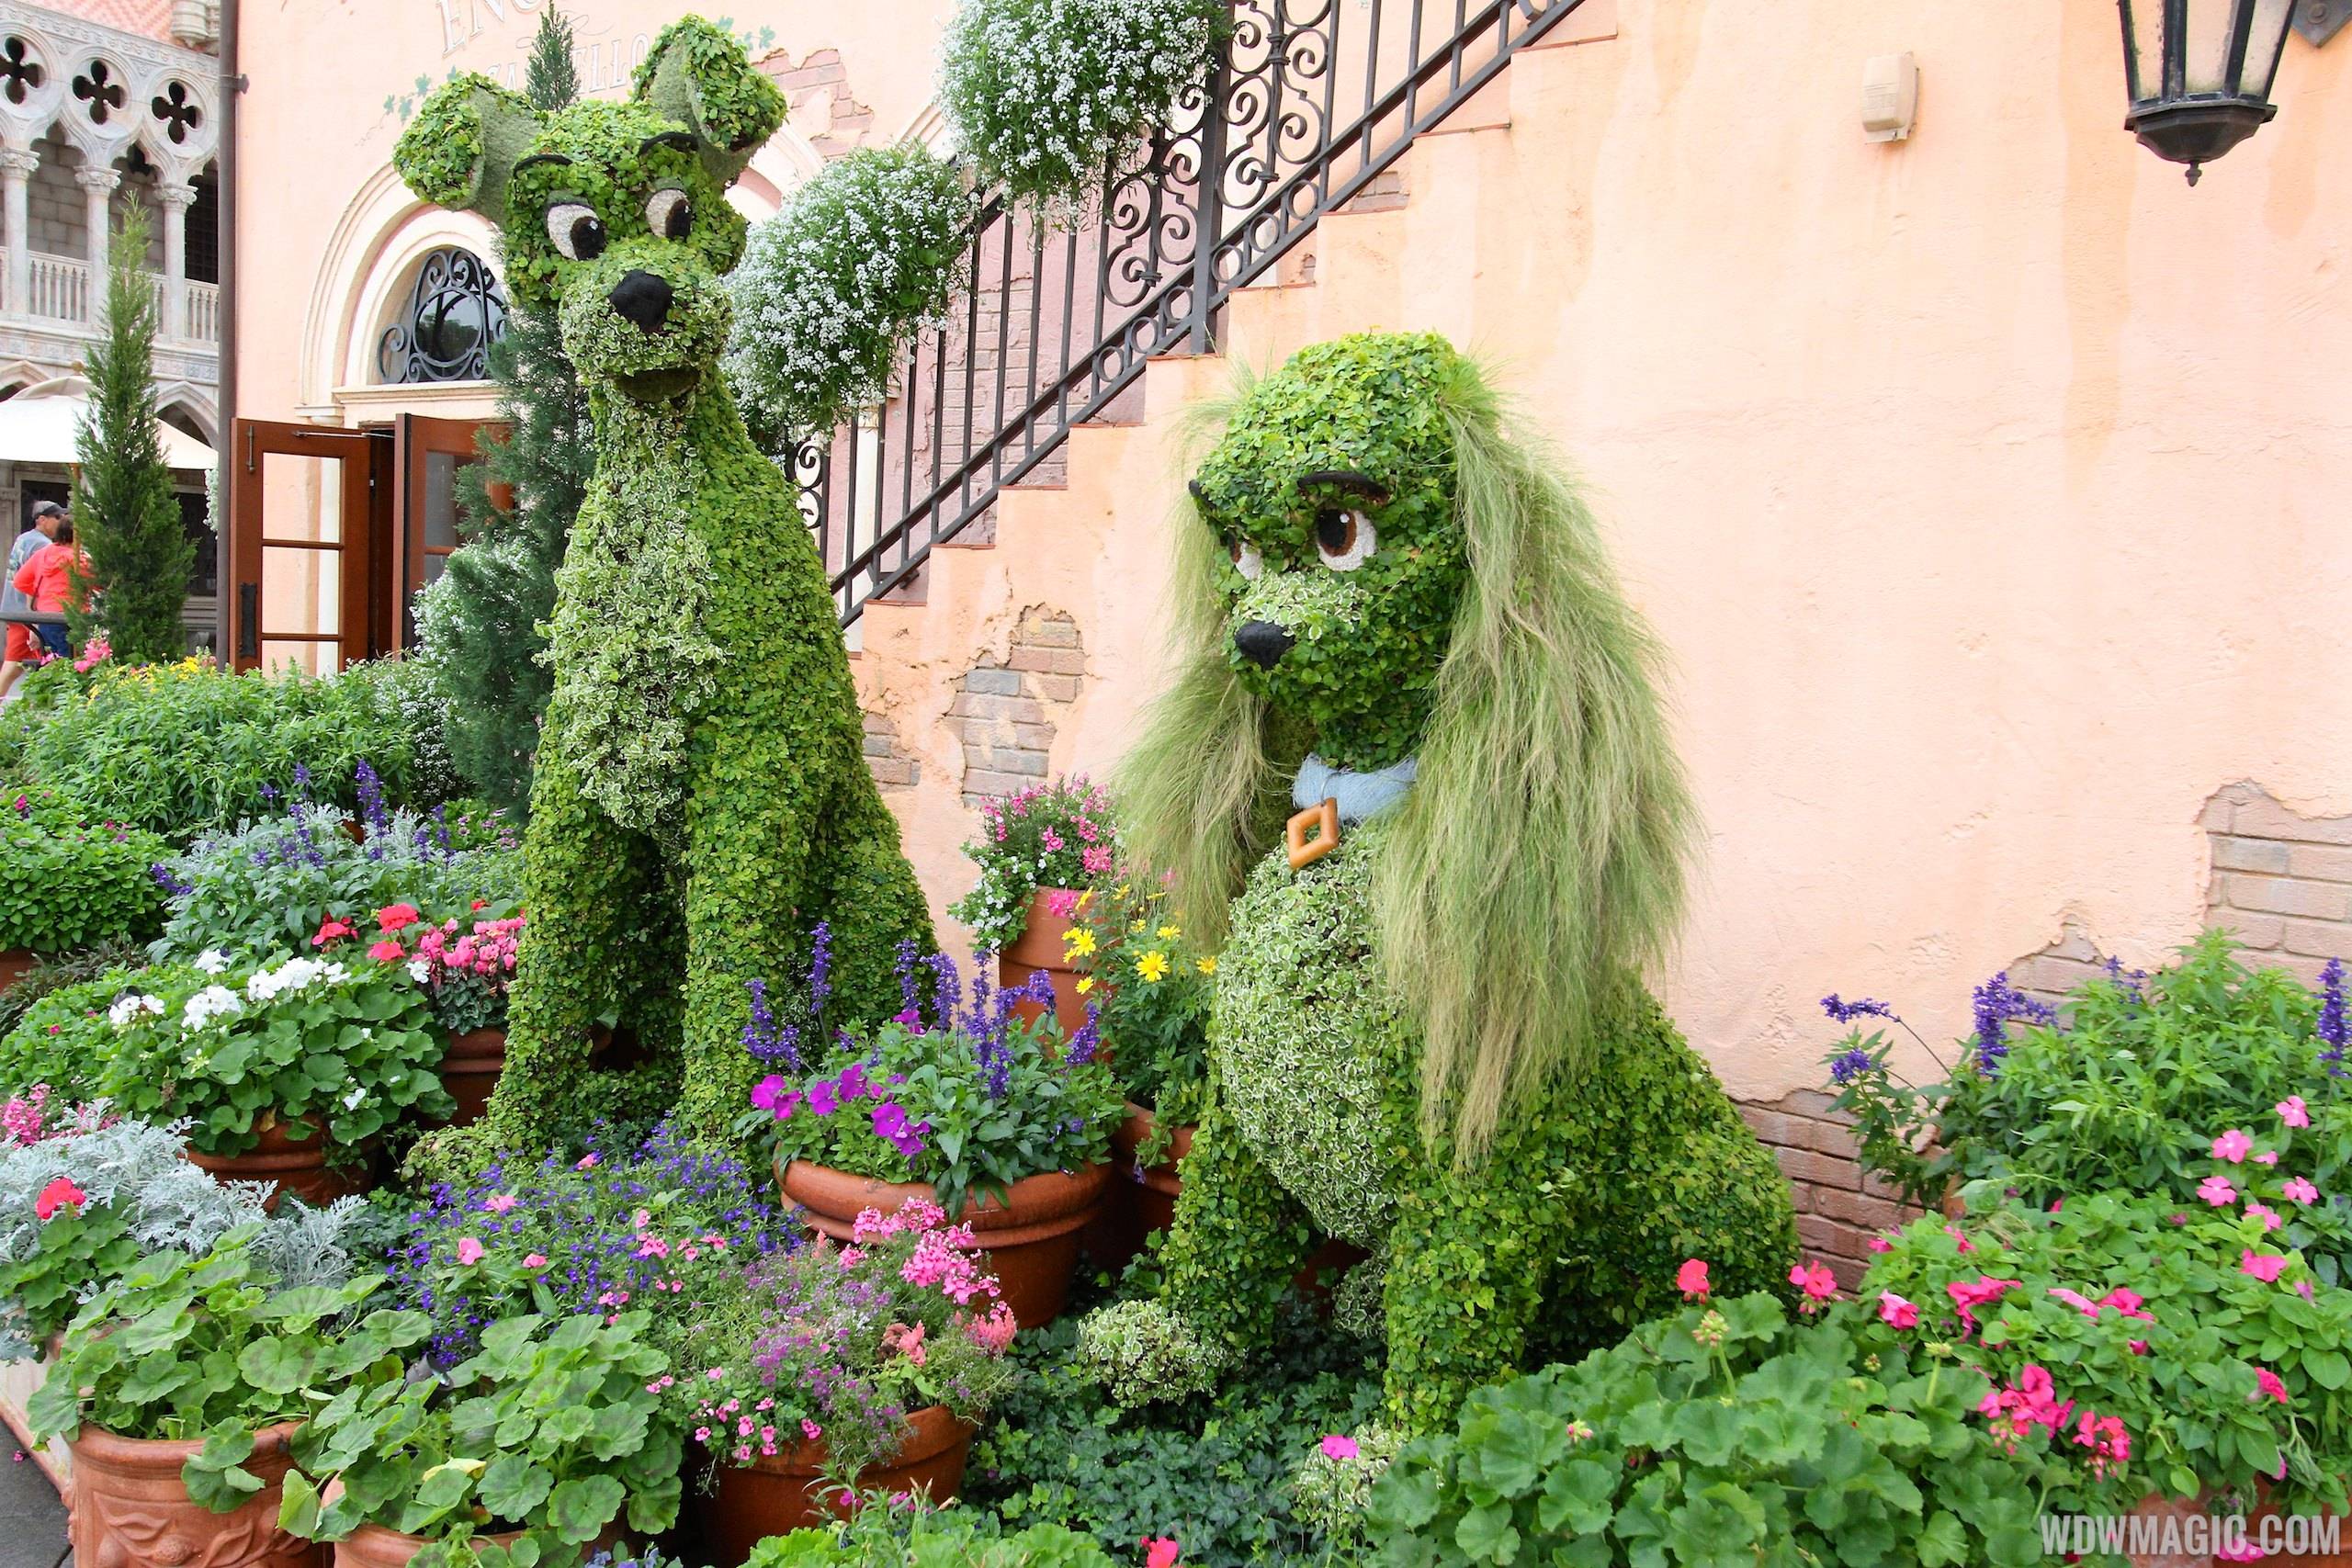 2014 Epcot Flower and Garden Festival - Lady and the Tramp topiary